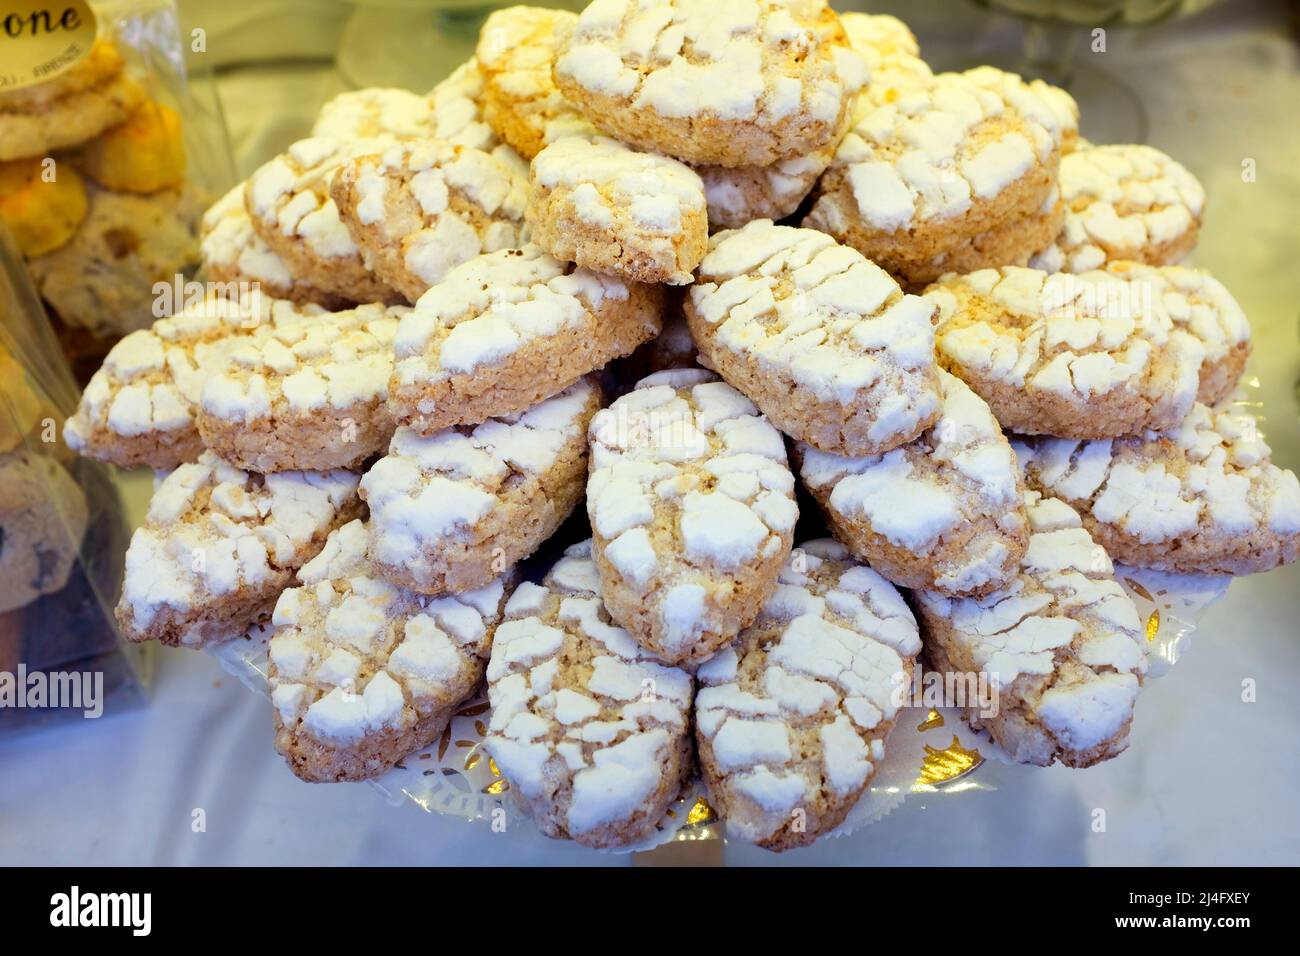 Ricciarelli - Chewy Italian Almond Biscuits on sale in Florence Italy Stock Photo